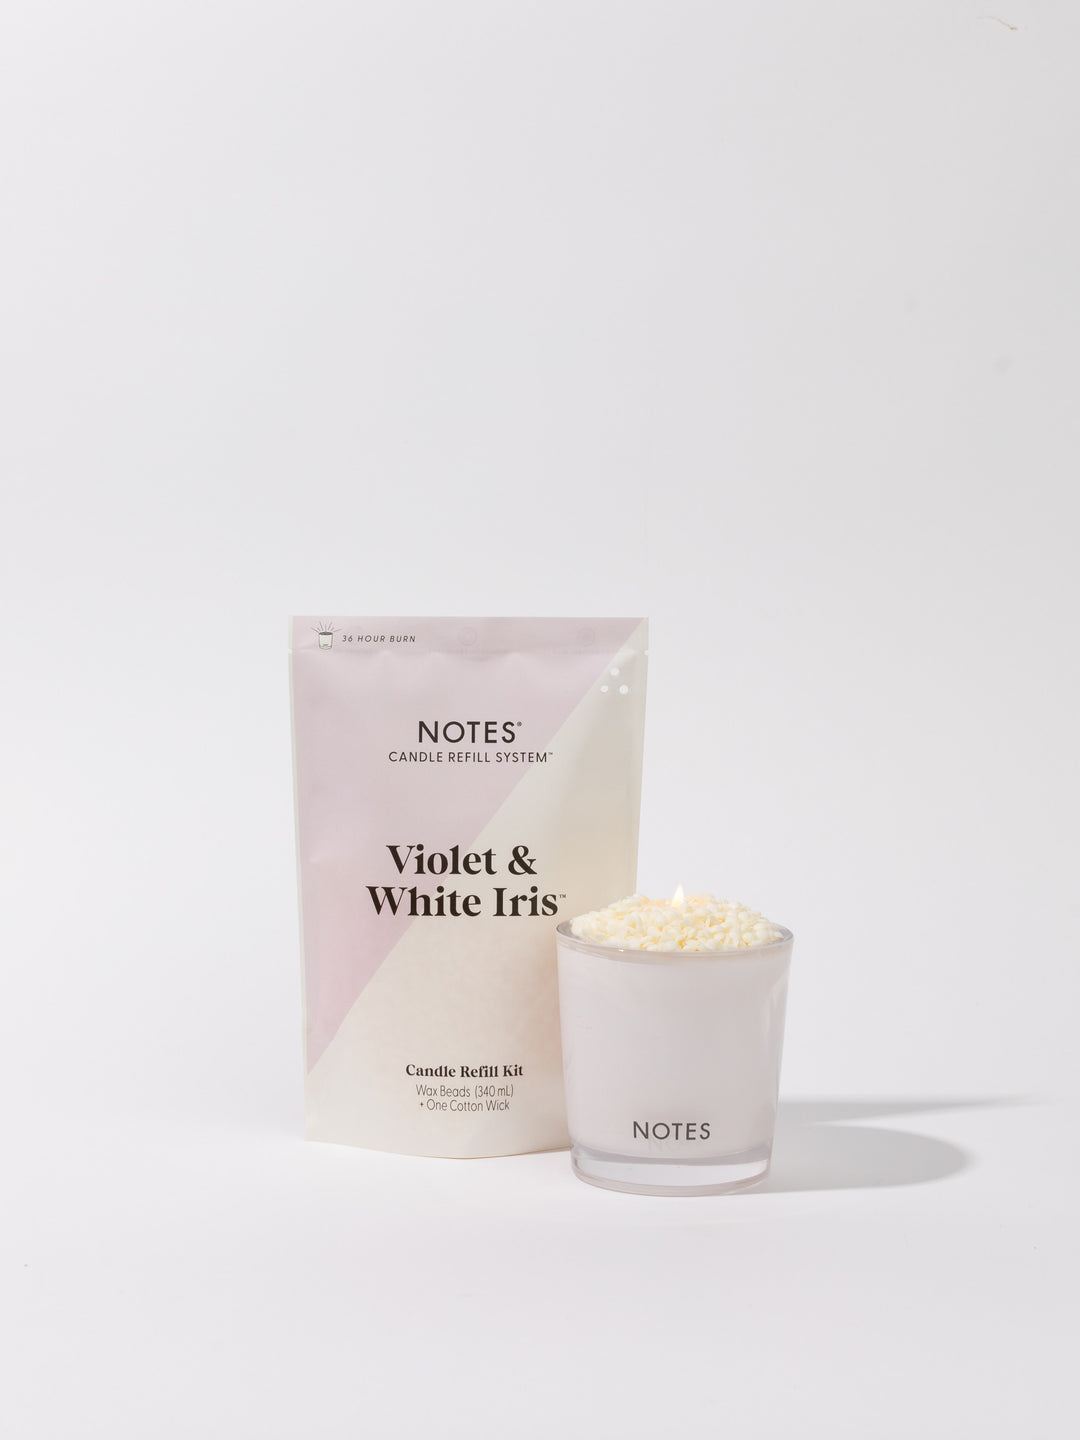 Sustainable Candle Refill Kit - NOTES Violet & White Iris